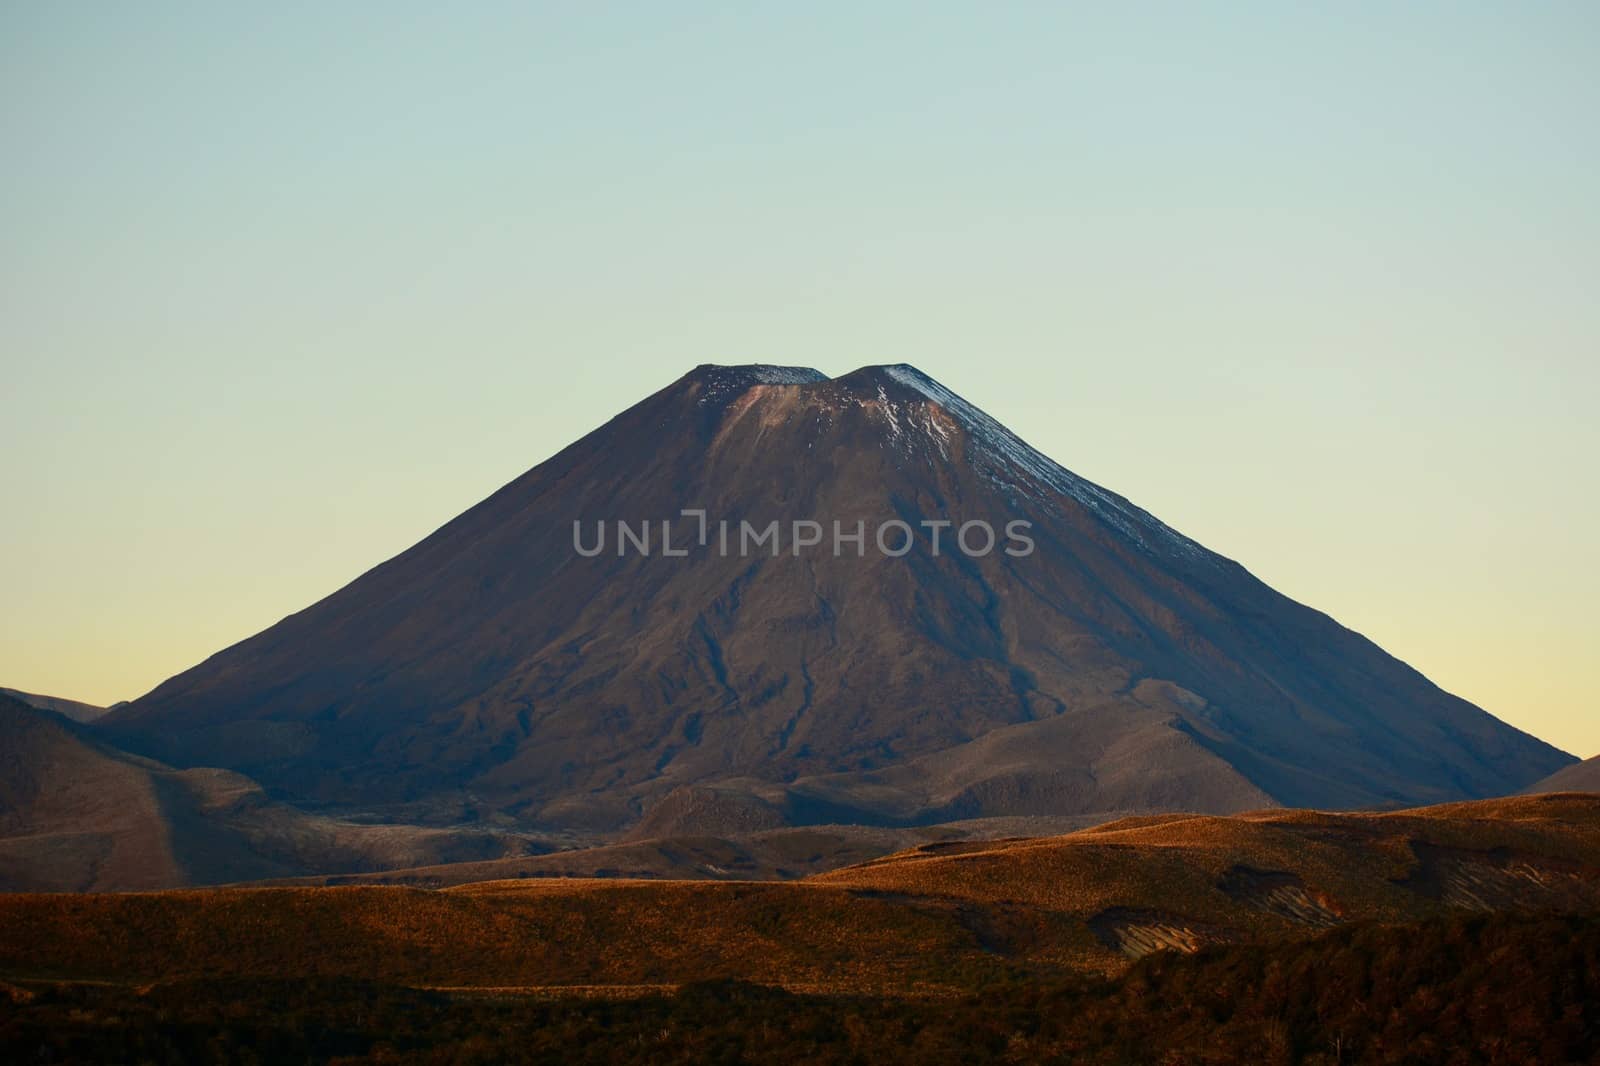 Symmetrial cone of a volcano (Mt Ngauruhoe) at Tongariro National Park, New Zealand. This is the largest and most active volcano of the Tongariro group, part of the Pacific Ring of Fire. by Marshalkina